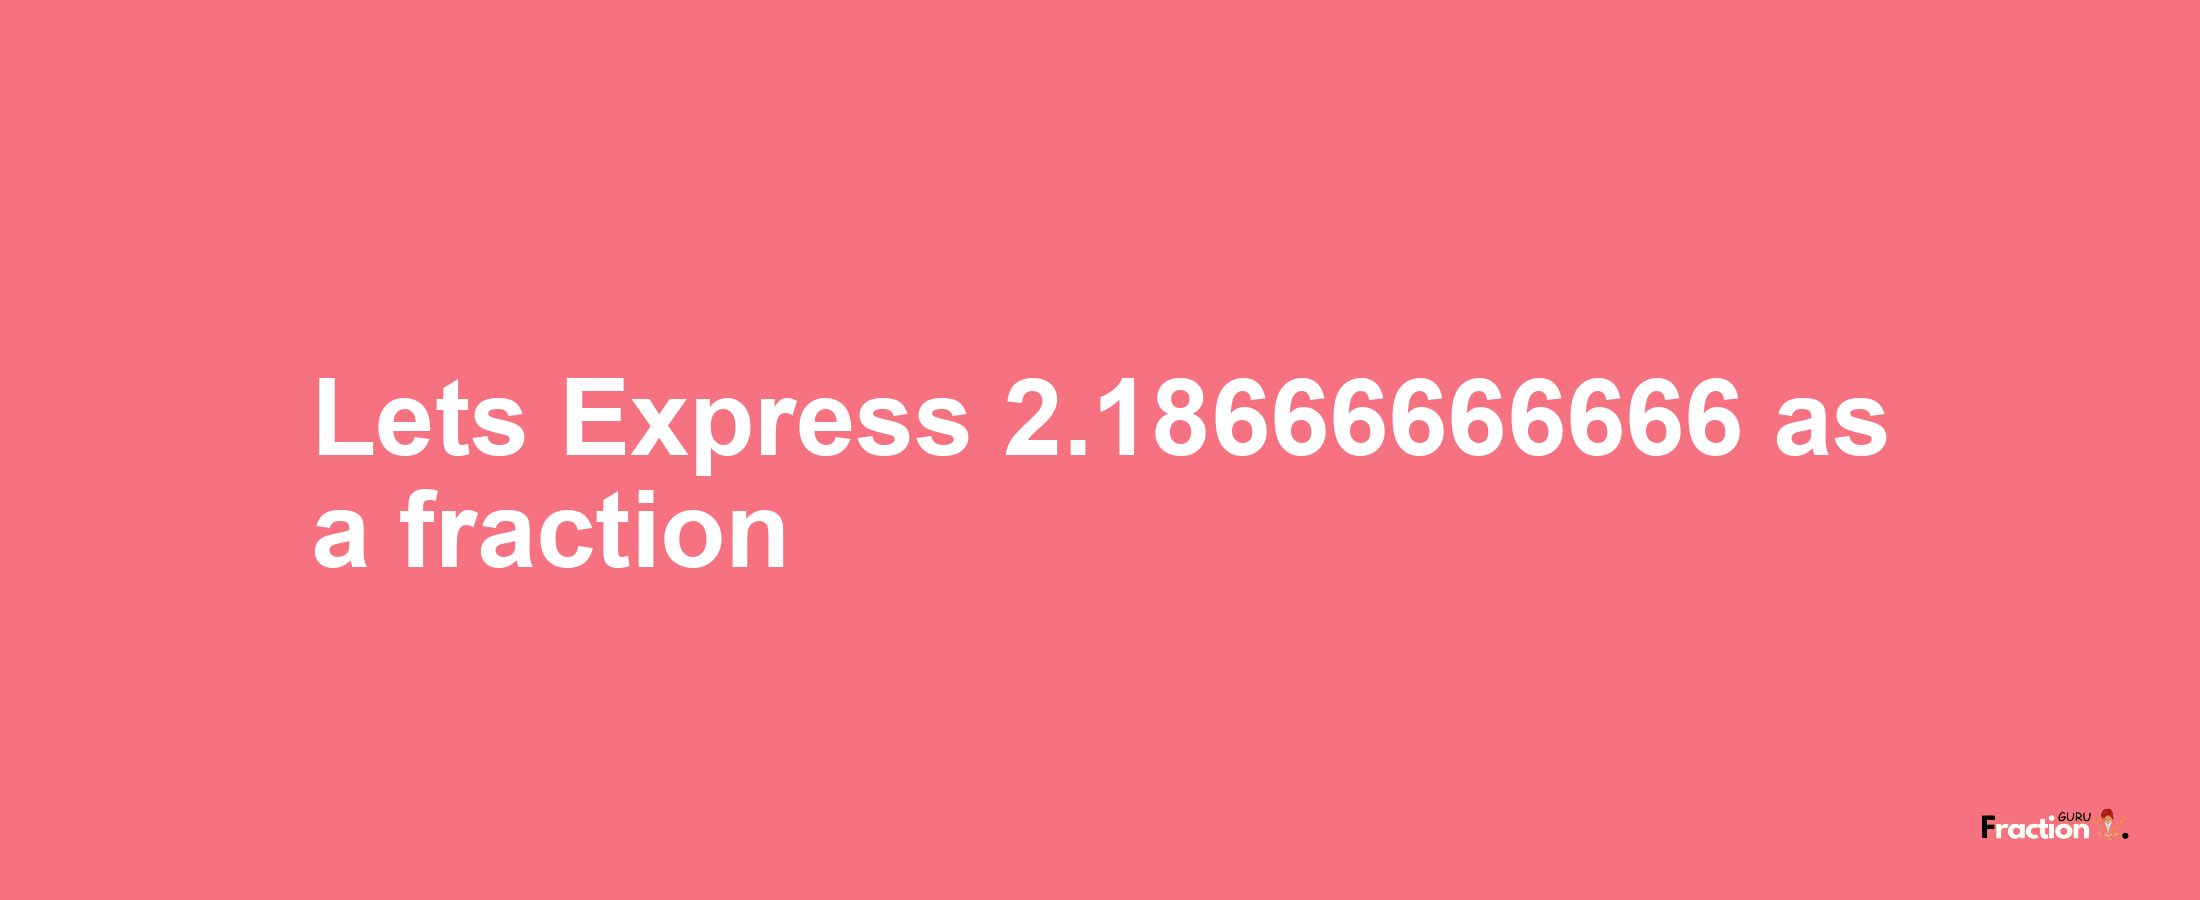 Lets Express 2.18666666666 as afraction